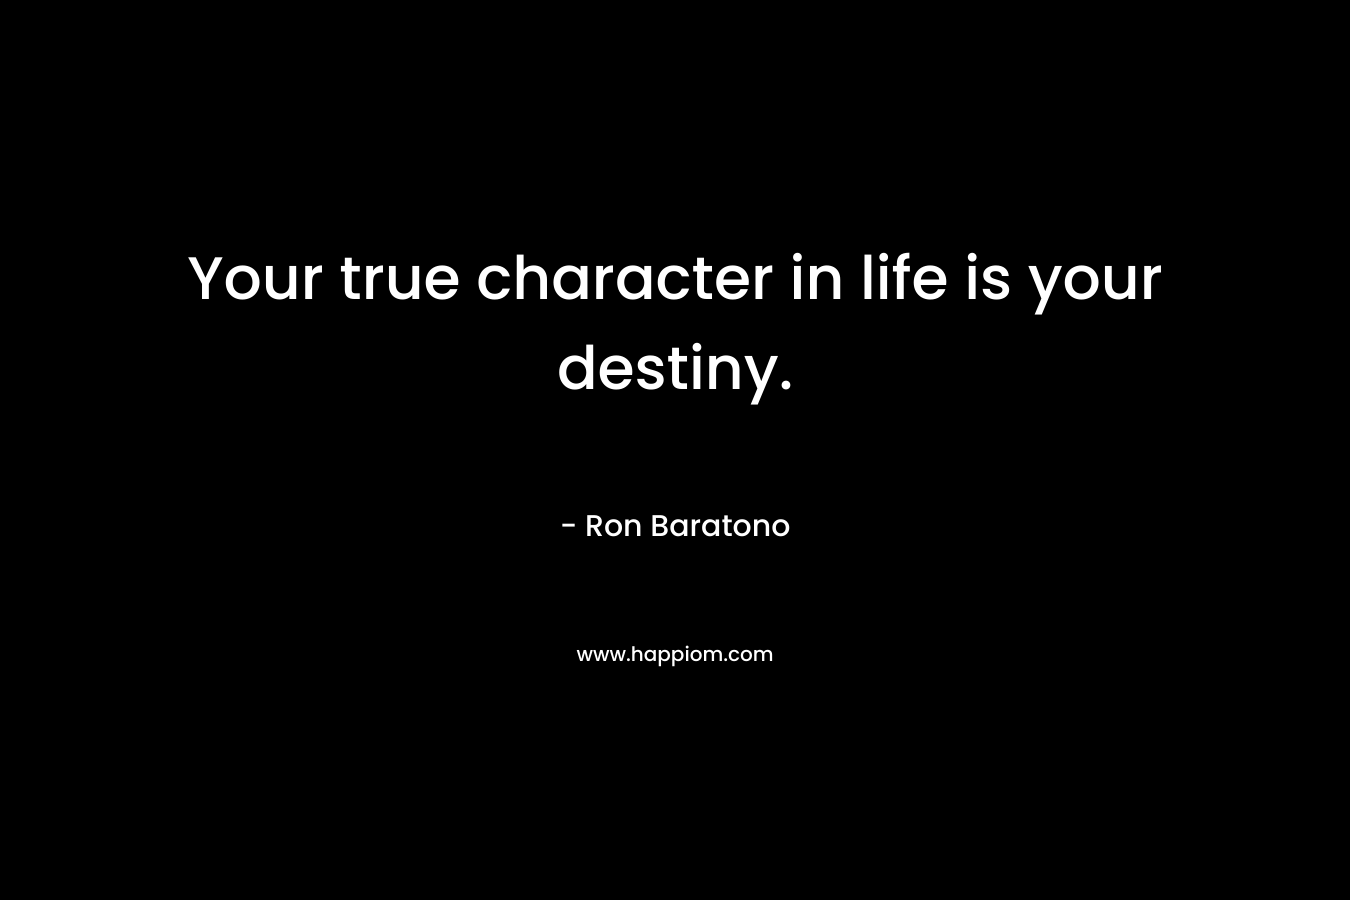 Your true character in life is your destiny. – Ron Baratono